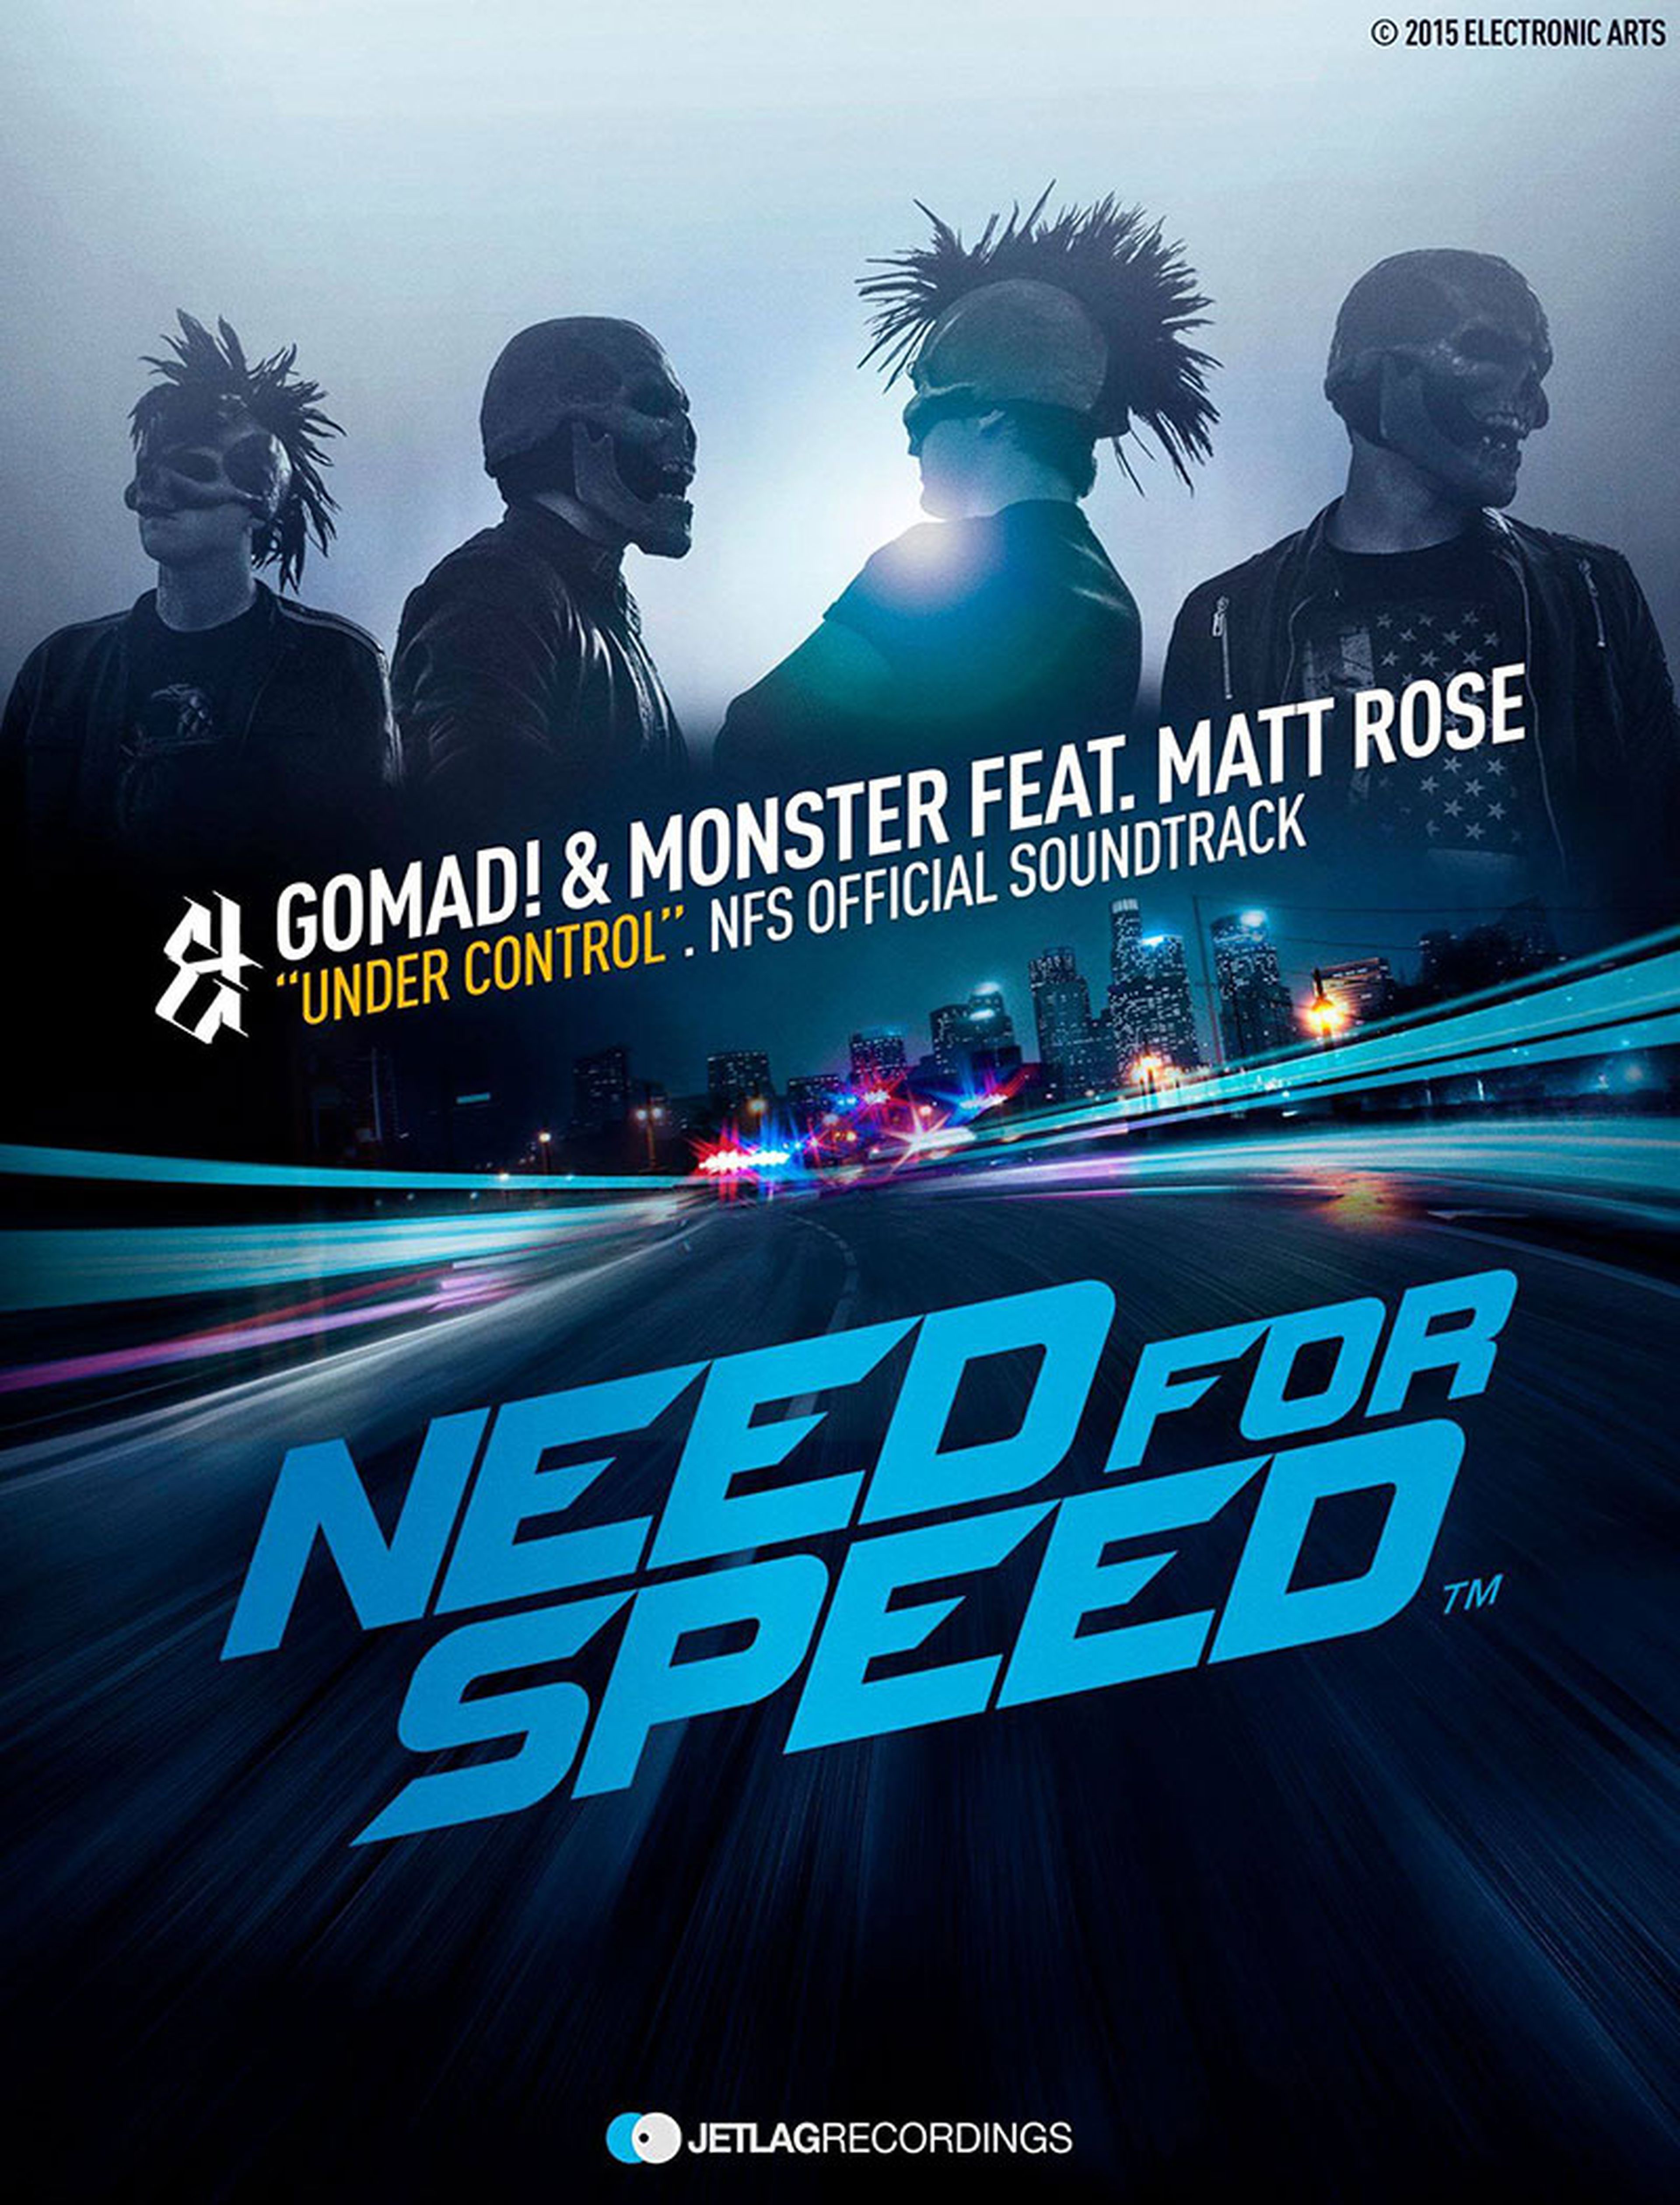 GoMad! & Monster Need for Speed